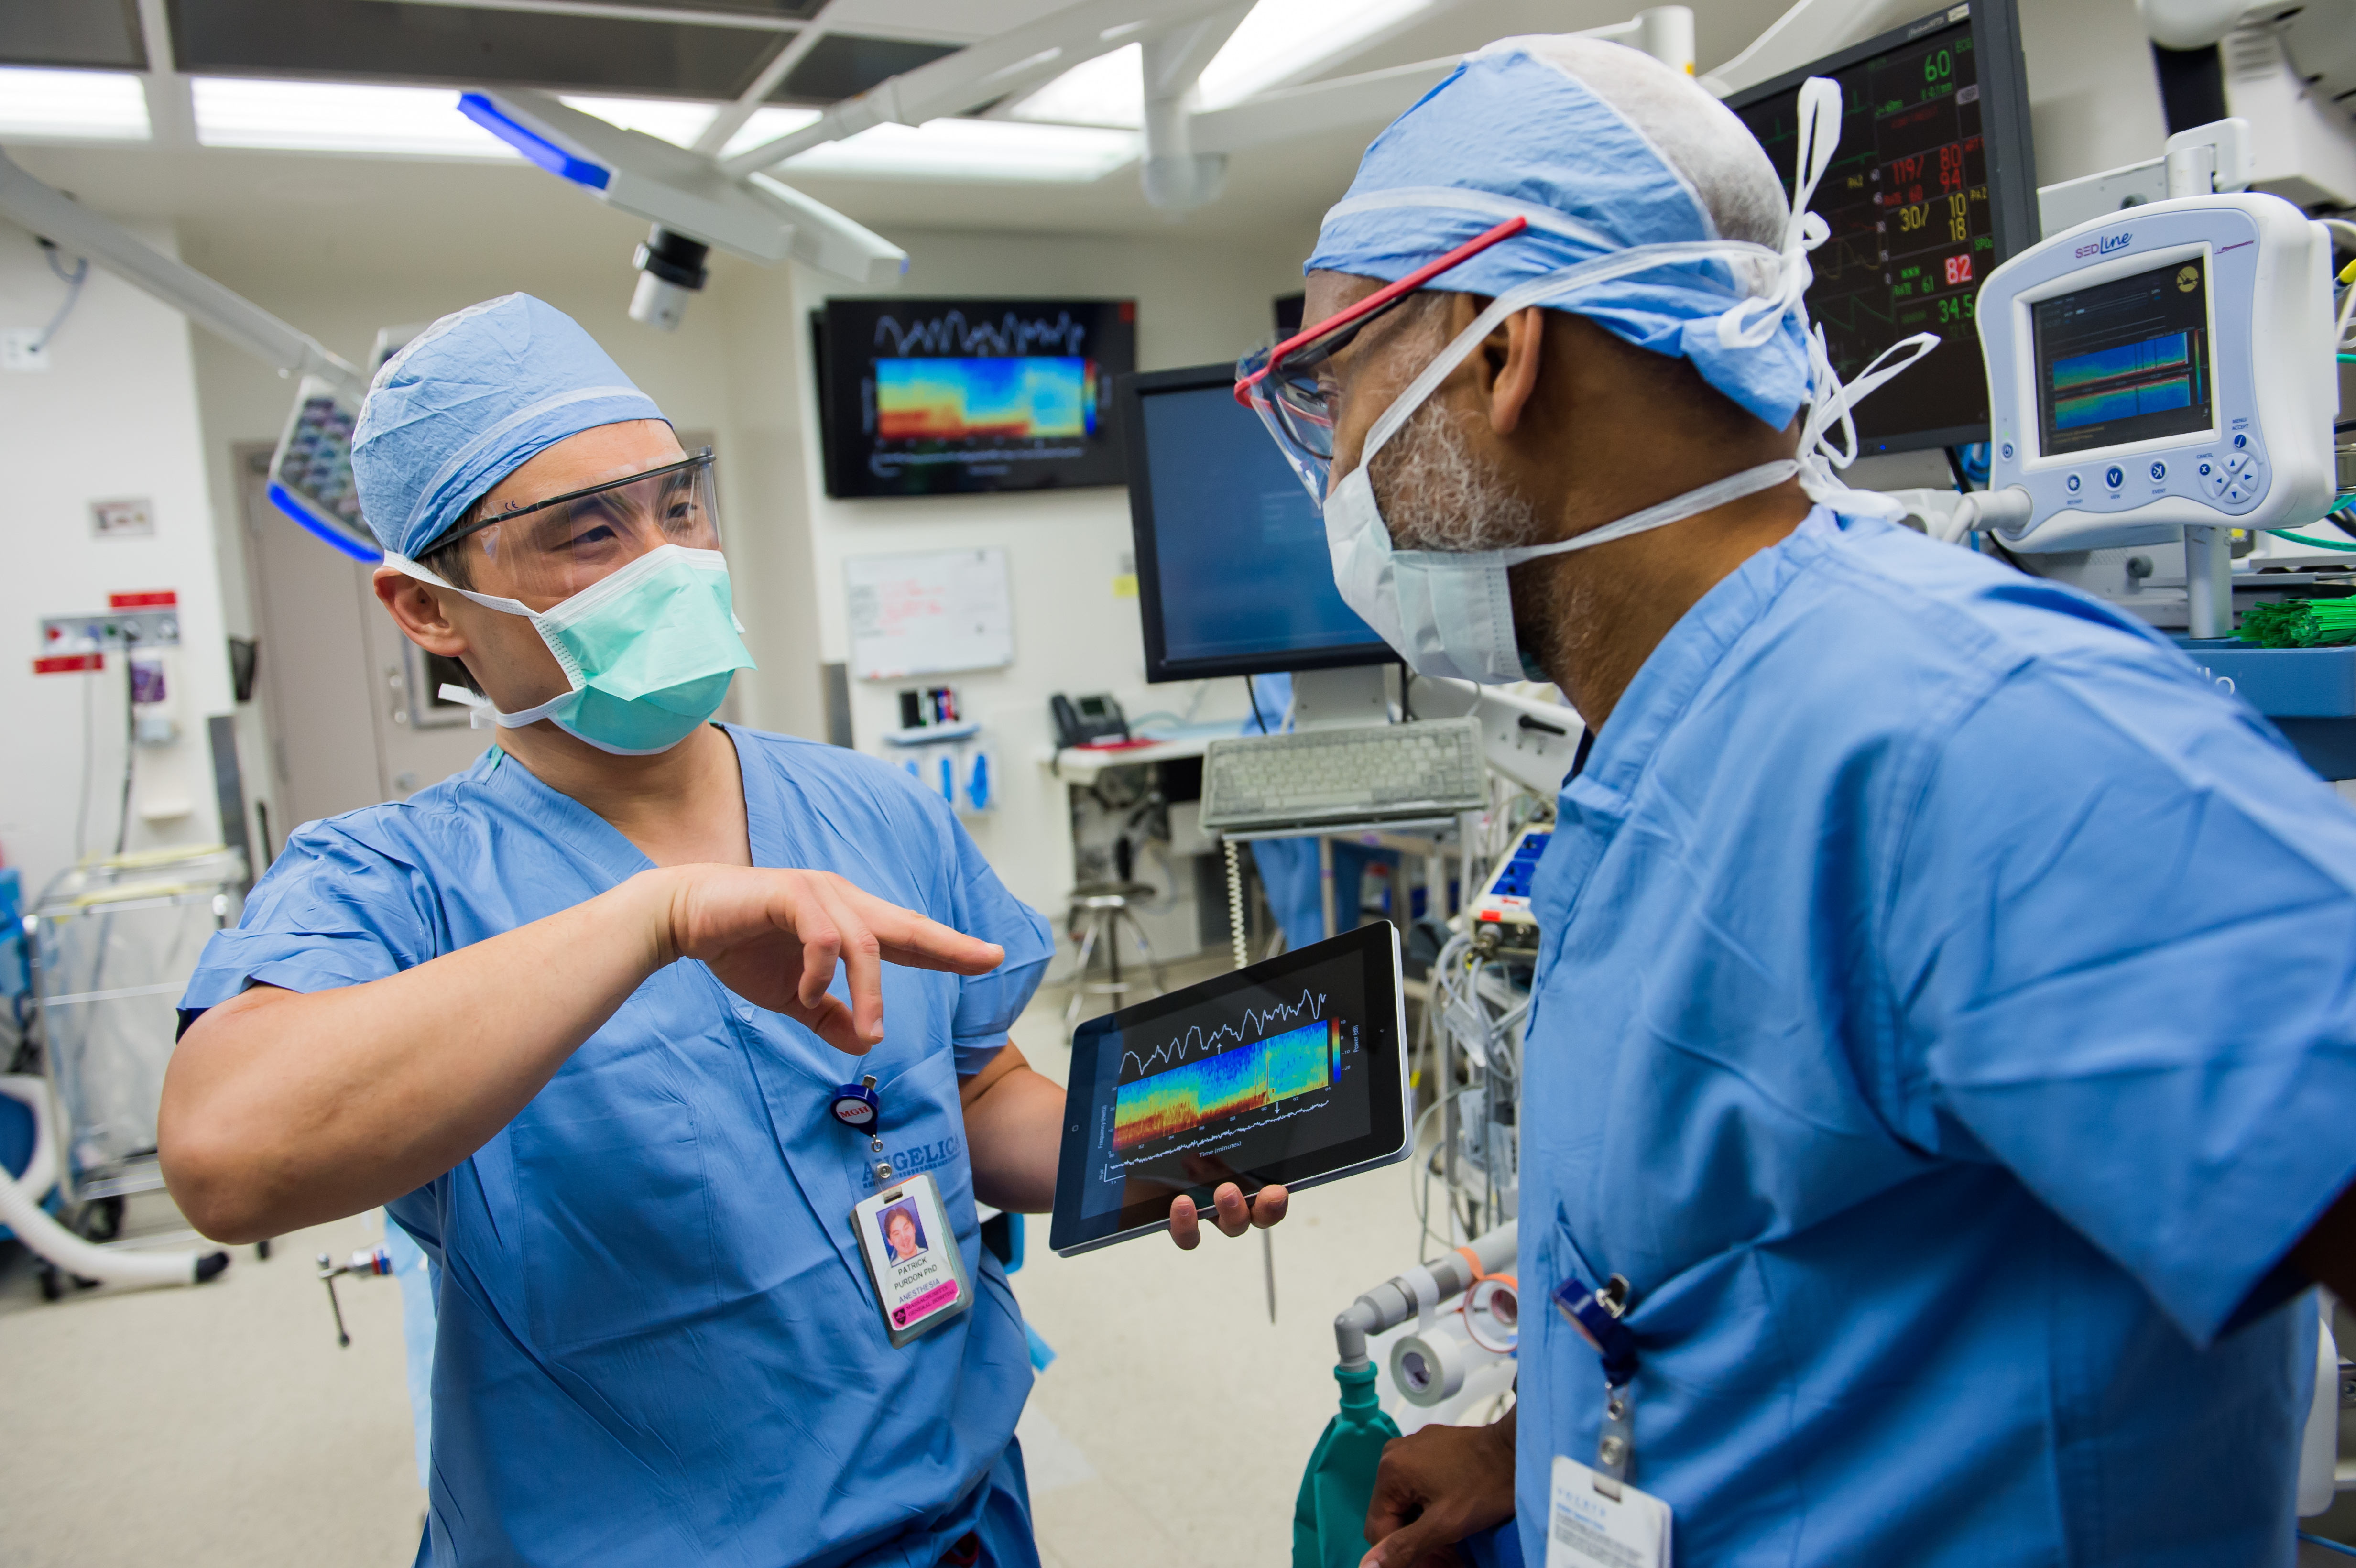 Two anesthesiologists talking in the operating room